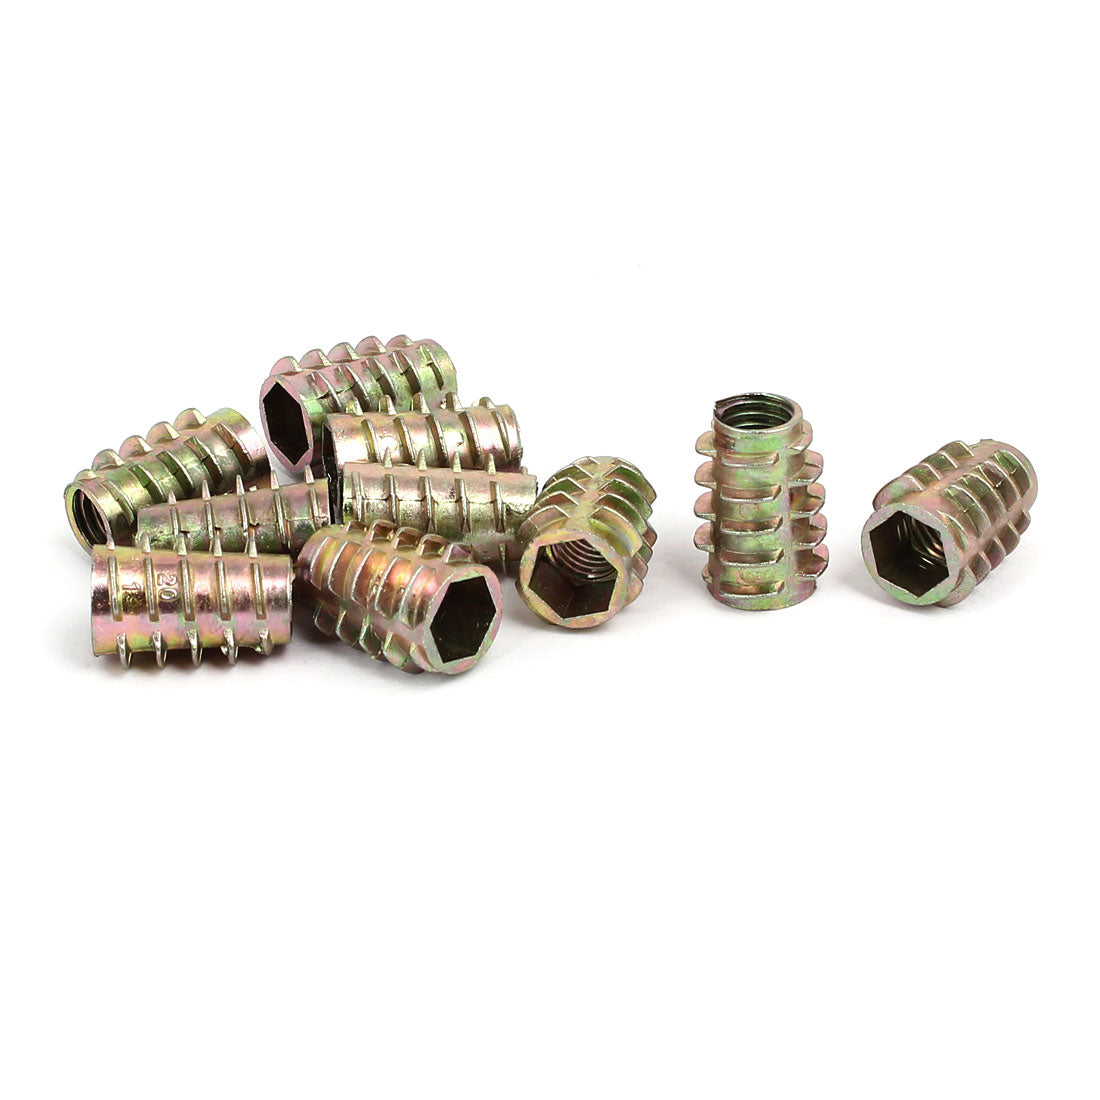 uxcell Uxcell M8x20mm Hex Socket Threaded Insert Nuts Bronze Tone 10pcs for Wood Furniture